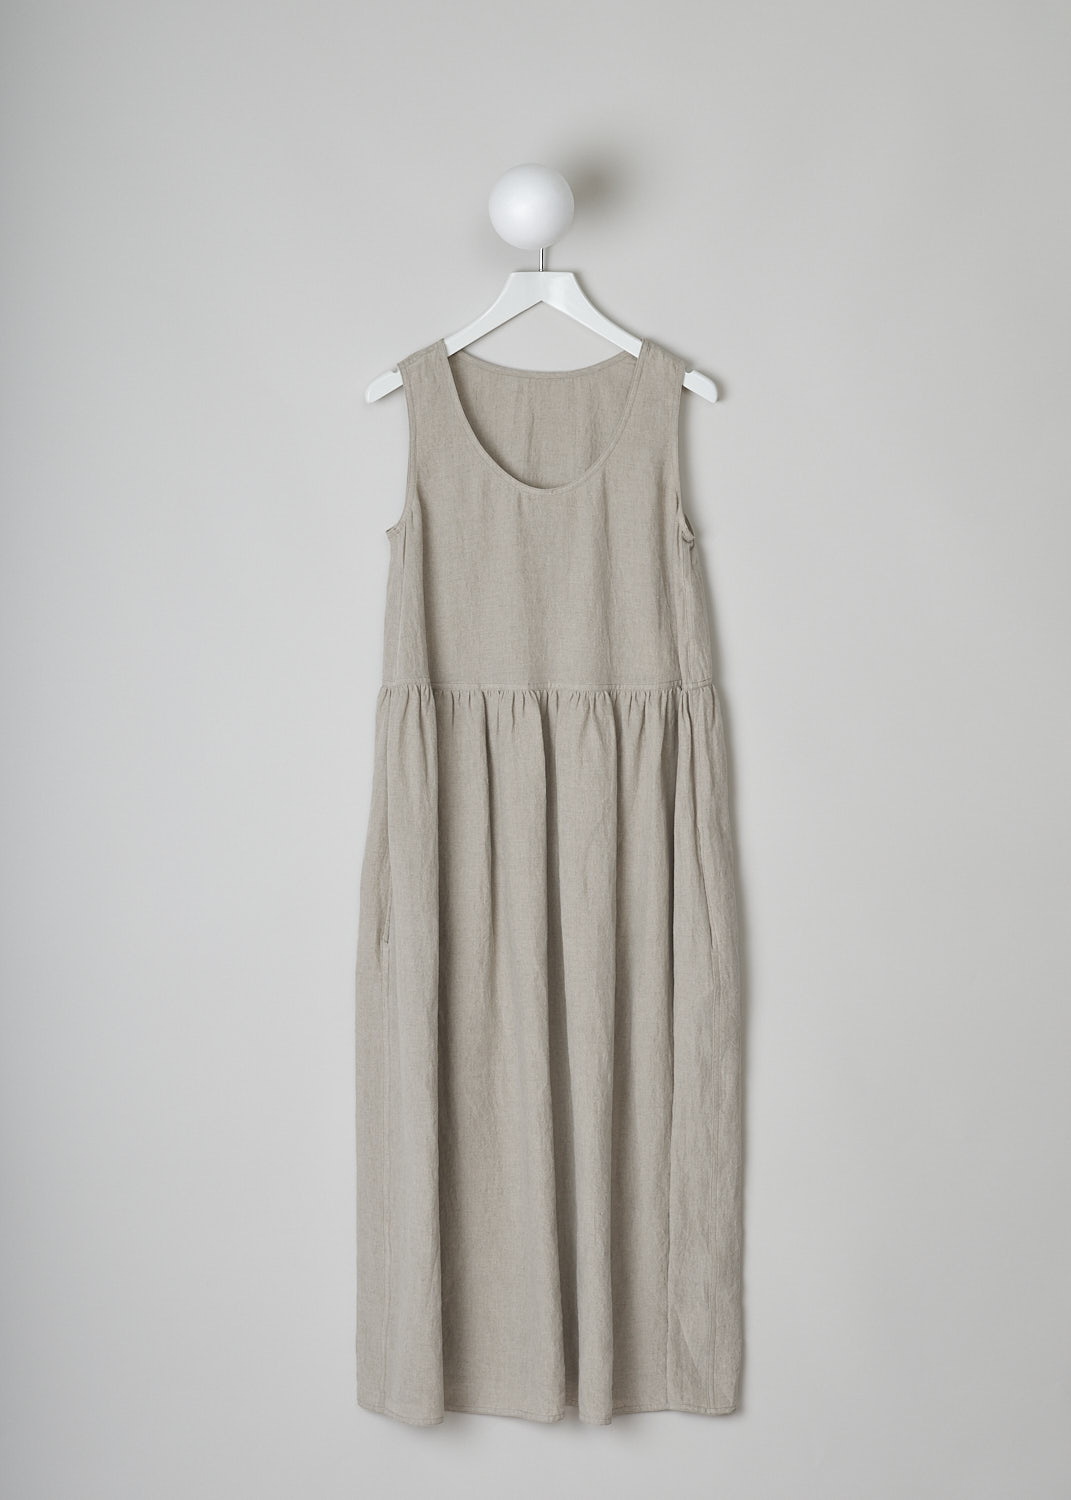 SOFIE D’HOORE, BEIGE LINEN DRESS, DANDLE_LIFE_NATURAL, Beige, Grey, Front, This beige sleeveless dress has U-neckline. The dress has a wide A-line silhouette. A straight crystal pleated hemline separates the bodice from the midi length skirt. Concealed slanted pockets can be found in the side seam. 
